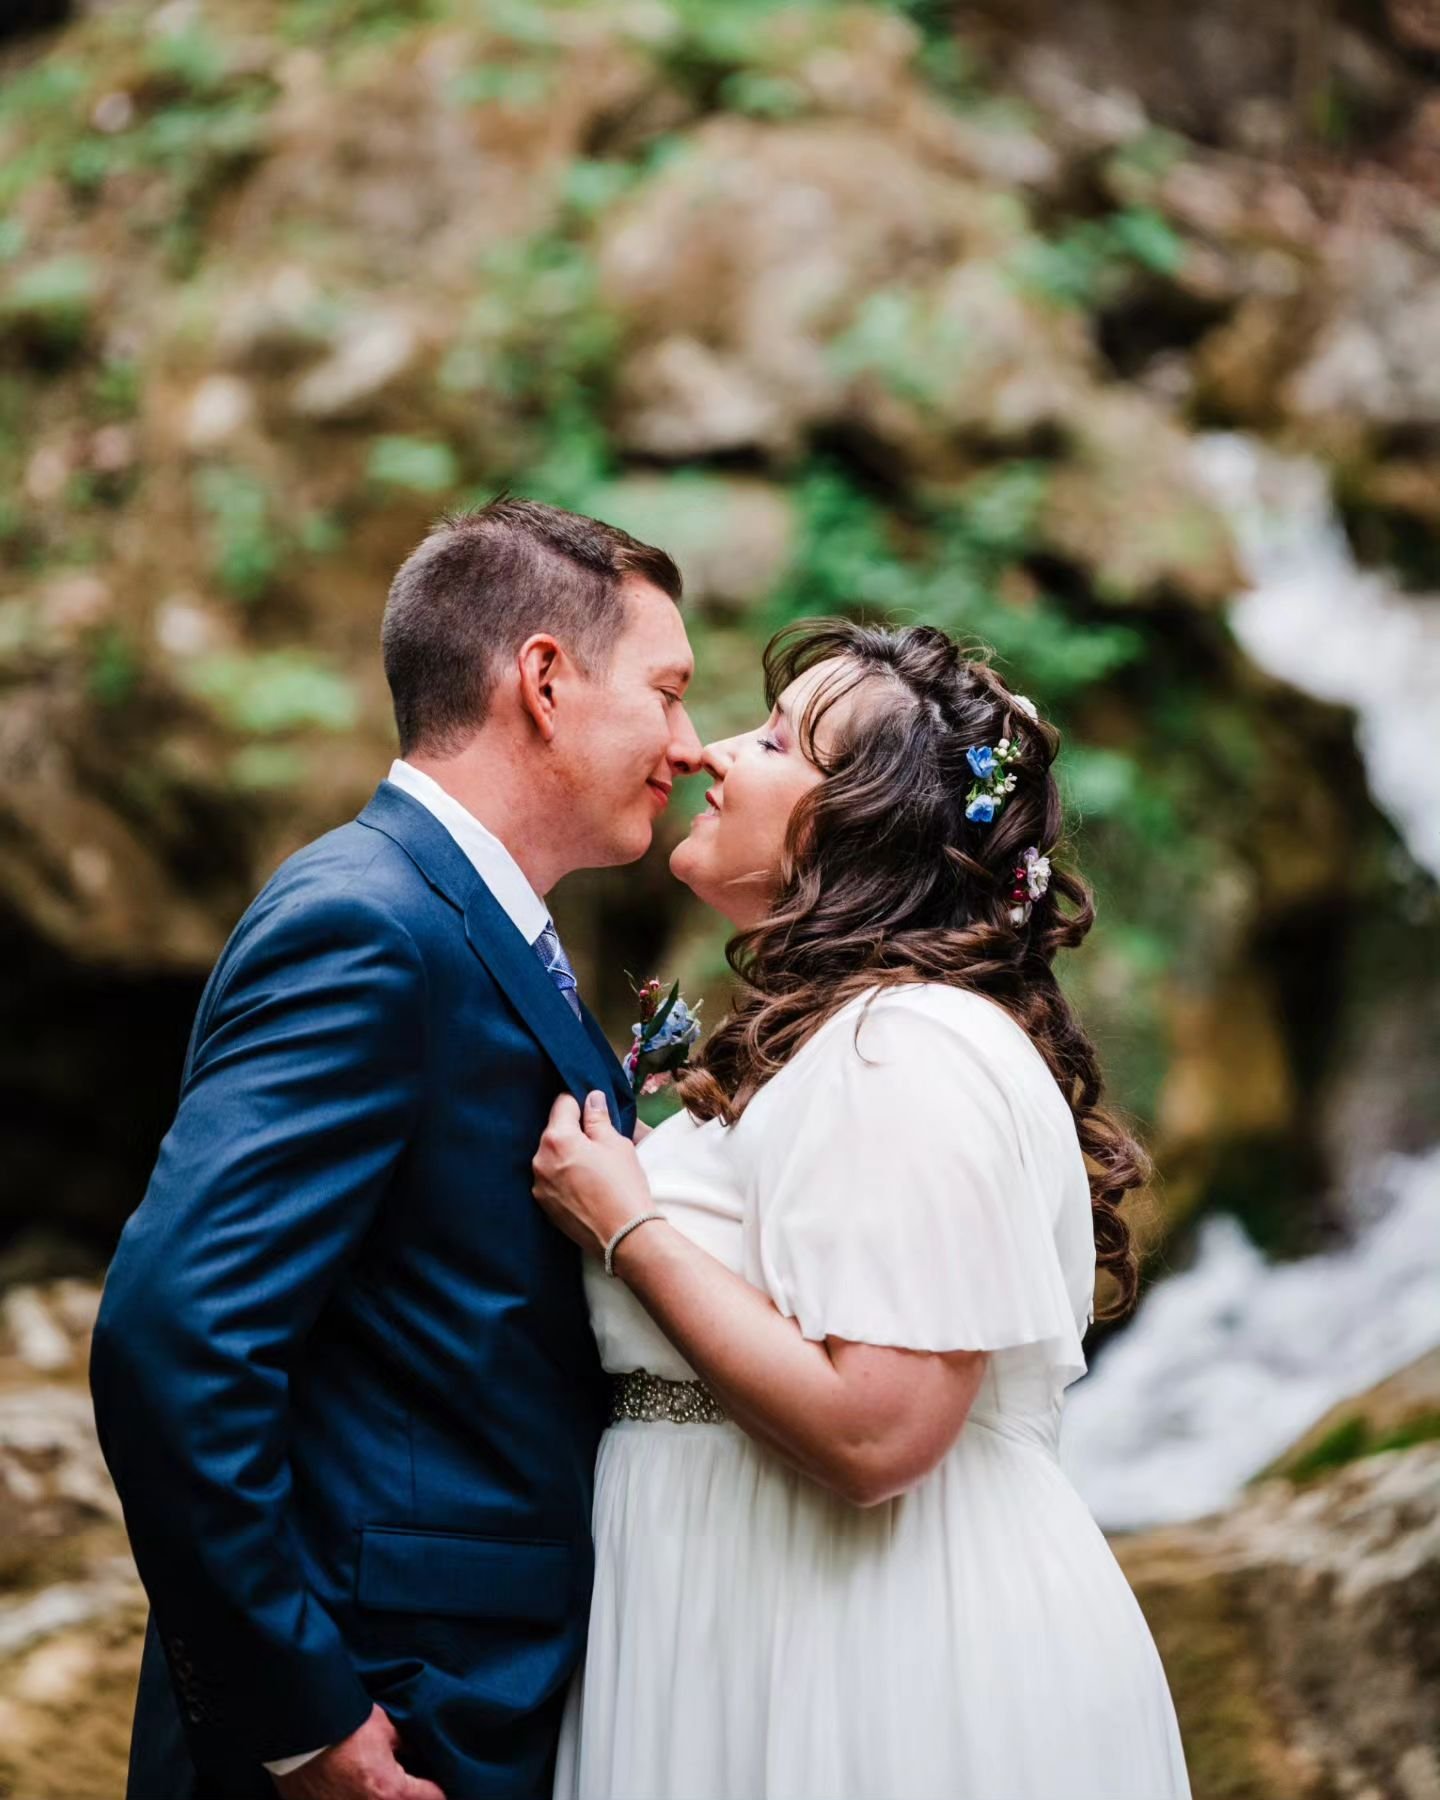 April and Ed are married! They had a Peruvian inspired ceremony on their property surrounded by family and friends. The have a waterfall on property where Ed proposed so it was such a sweet spot for their first photos as a married couple!

#virginiap